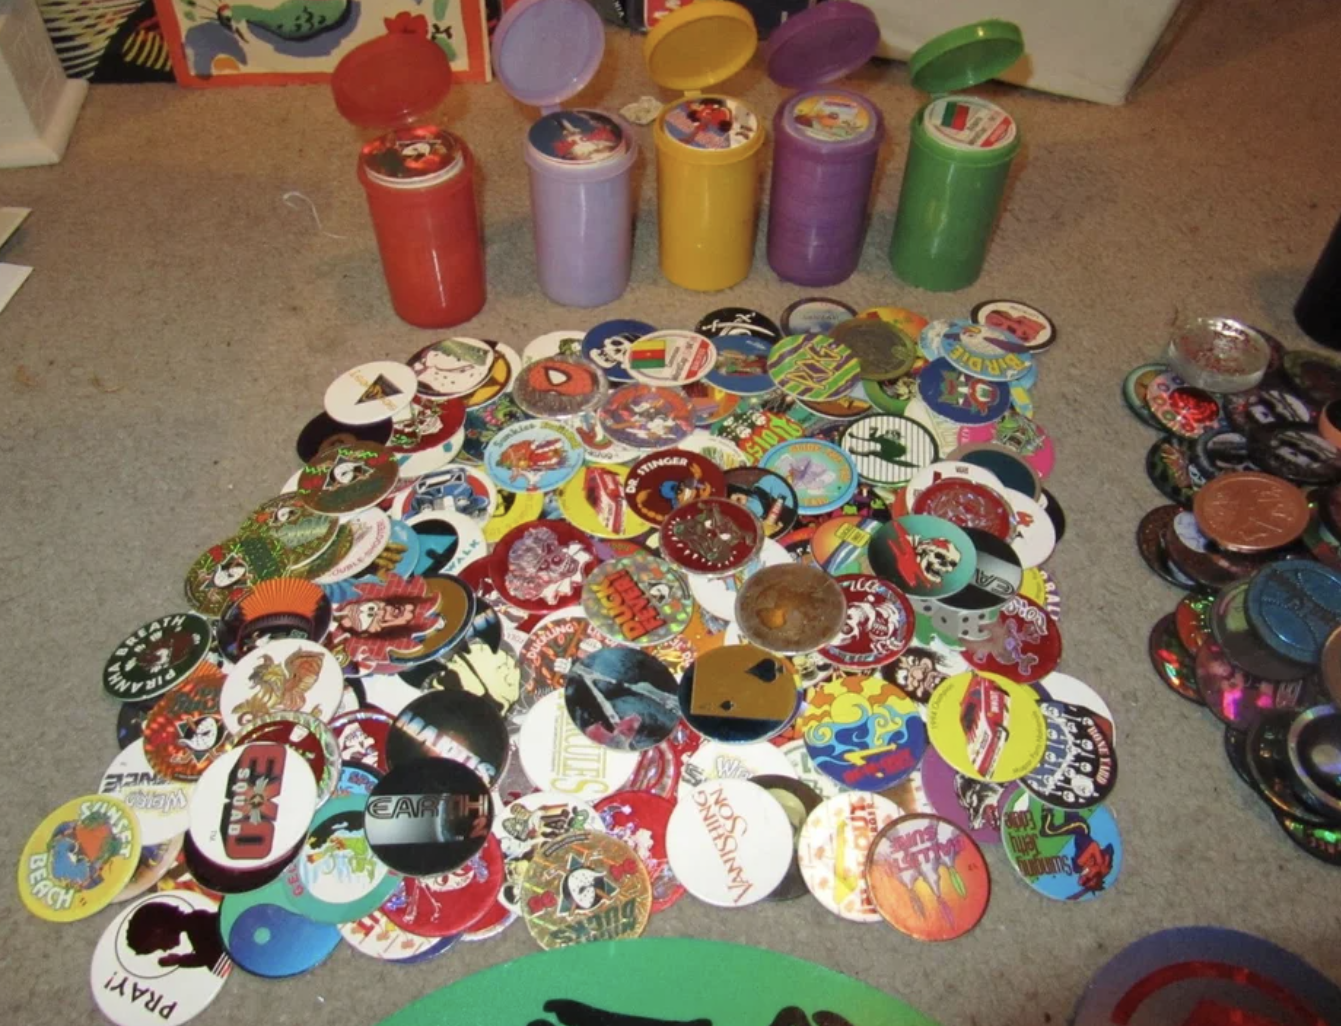 epic collections - pogs 90s - Pray! Duers We Pe